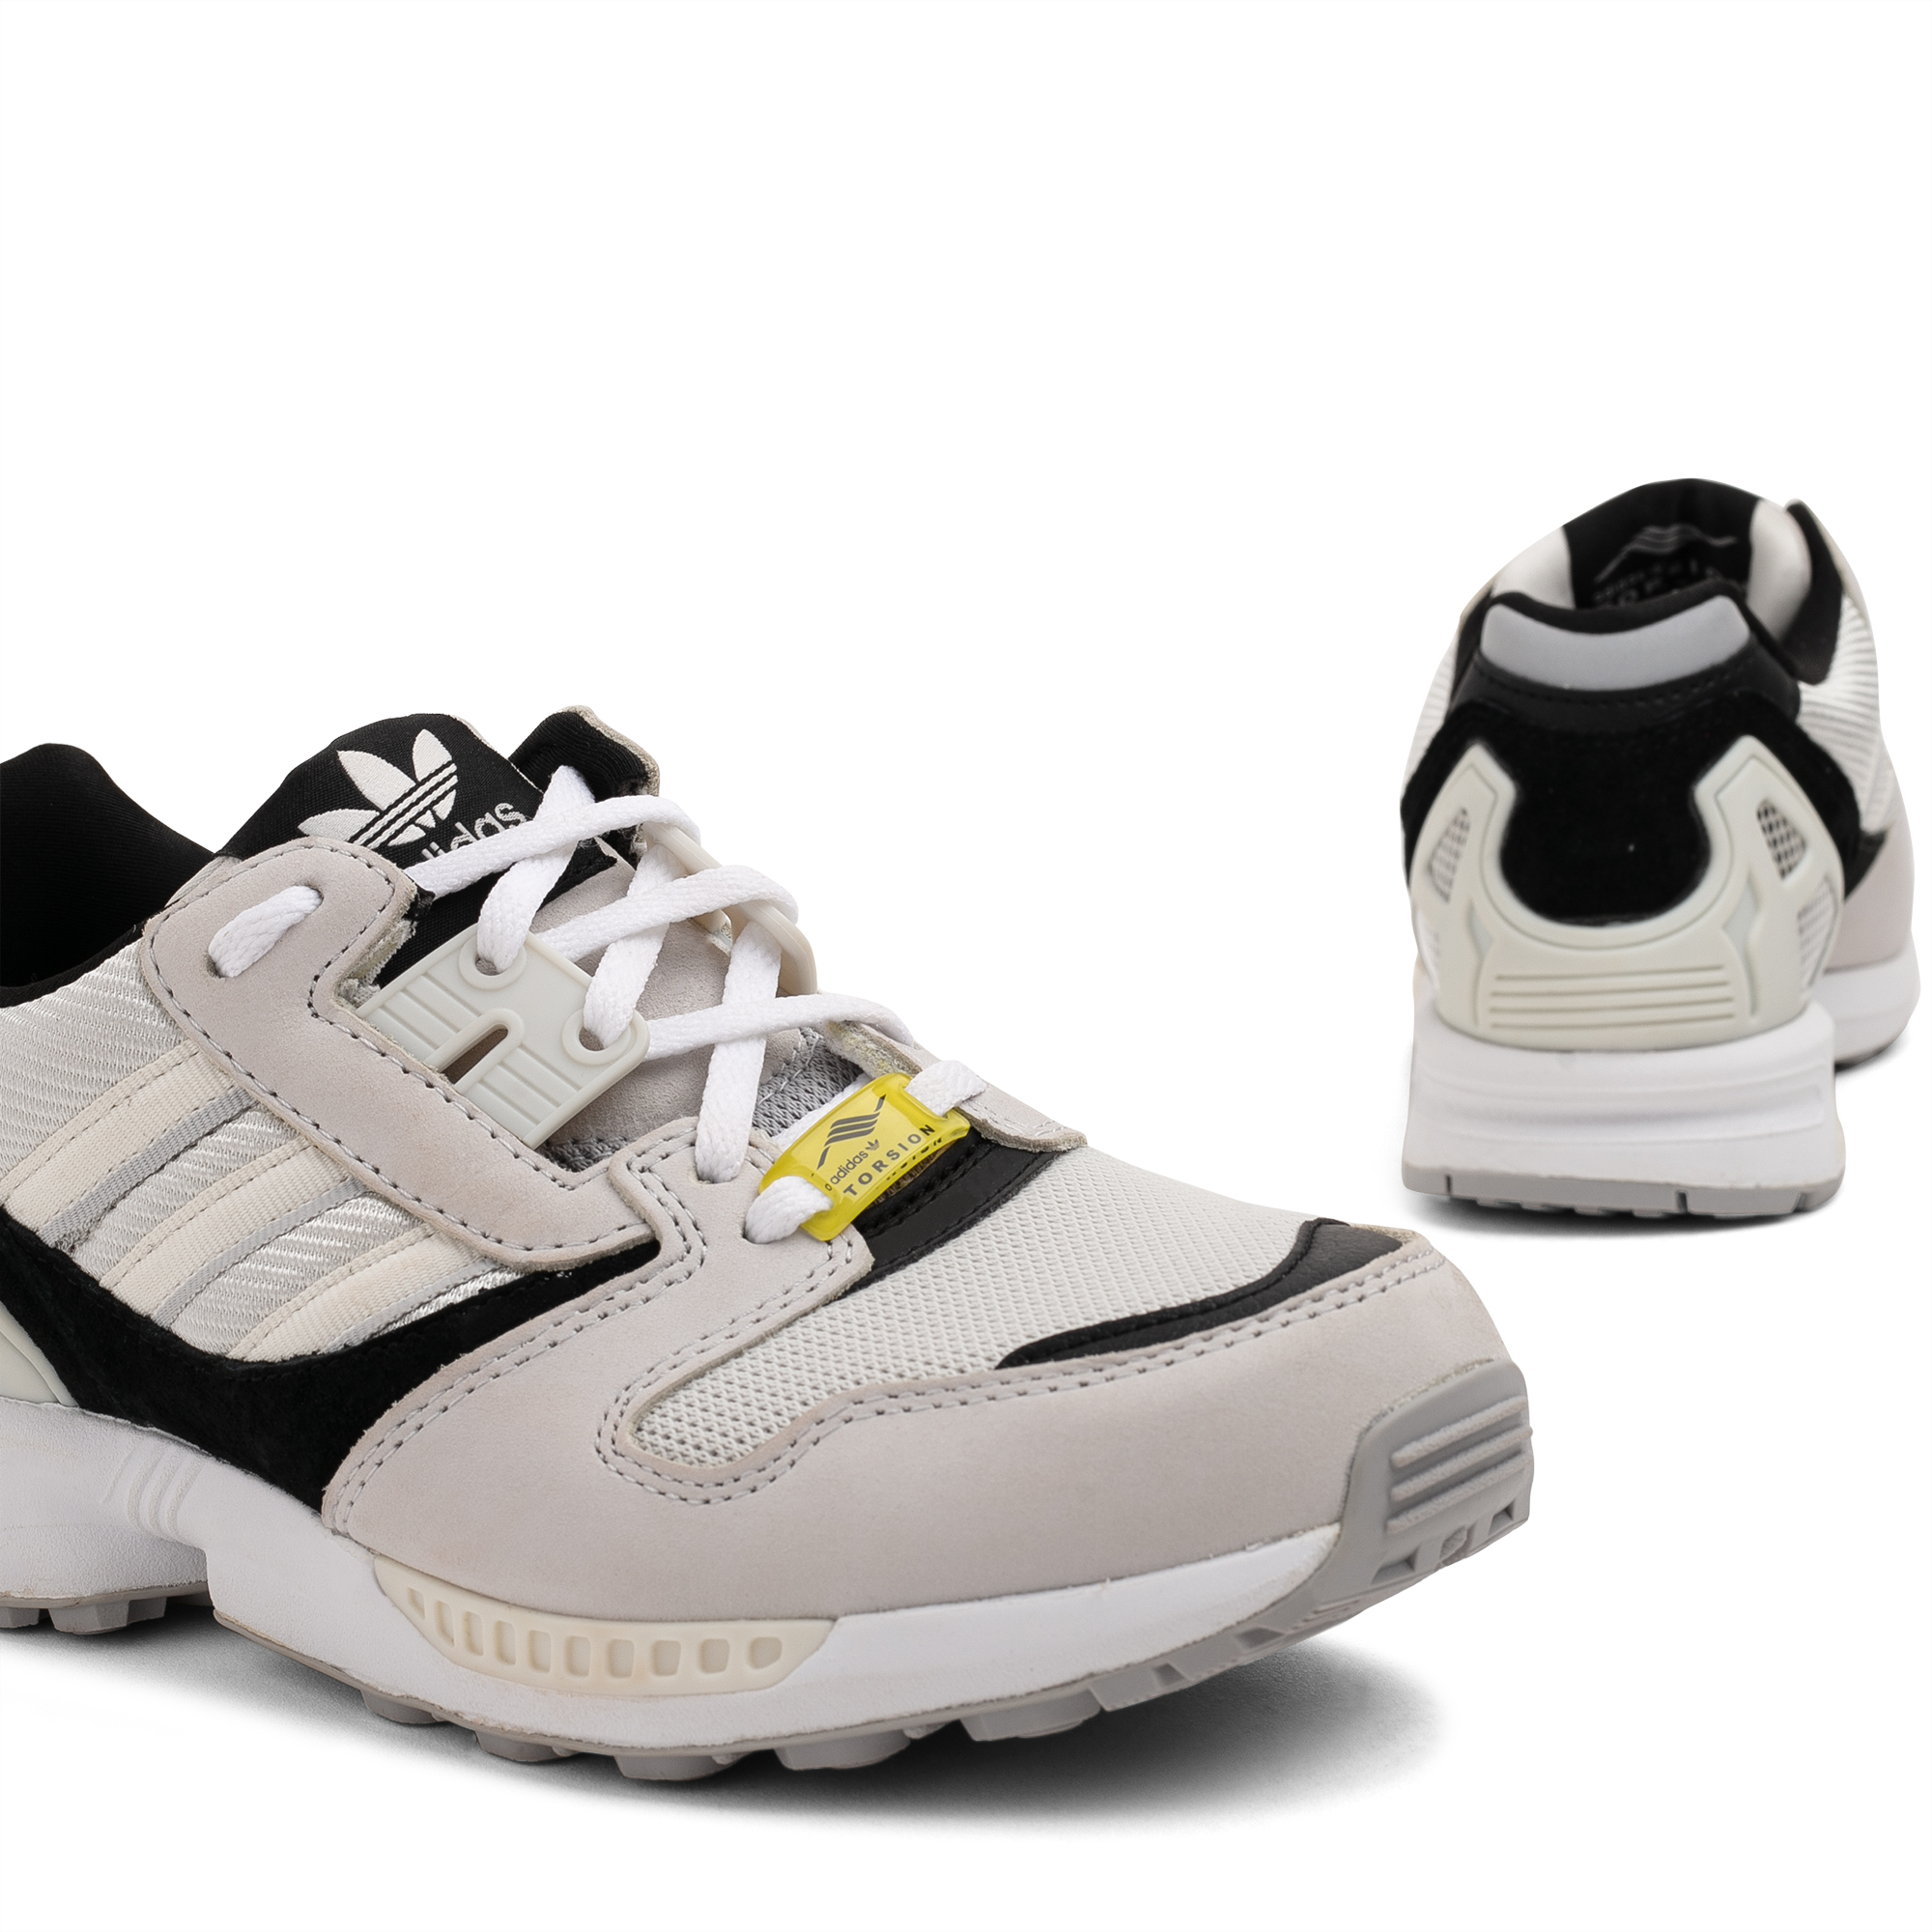 Adidas ZX 8000 sneakers for Women - White in KSA | Level Shoes